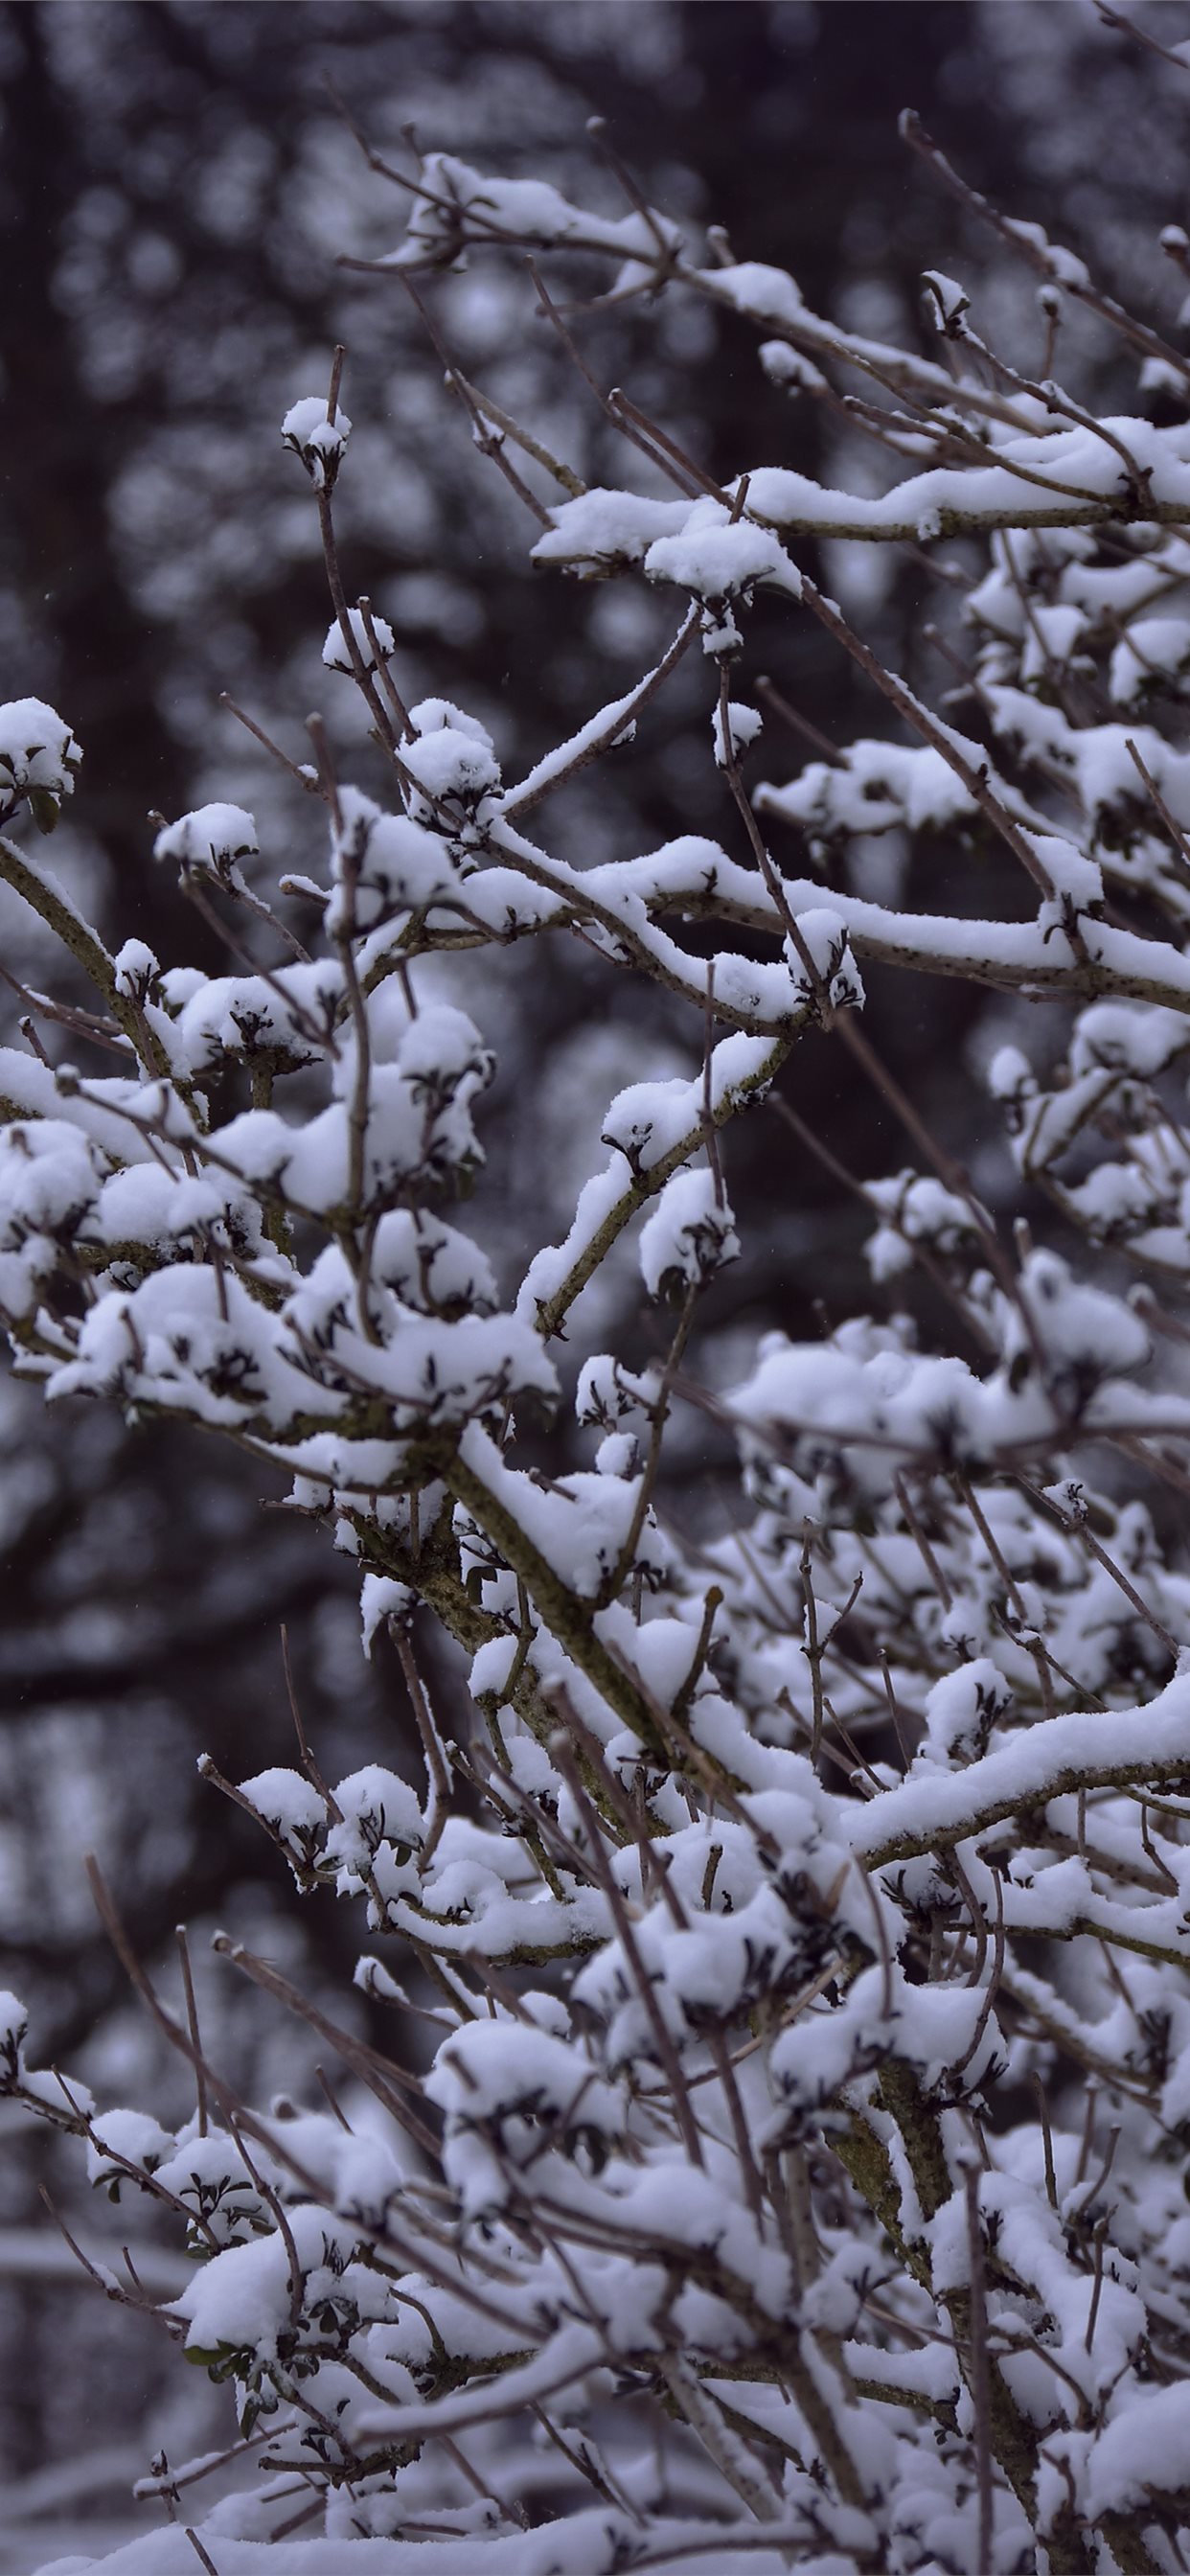 snowy branches 5k iPhone X Wallpaper Free Download